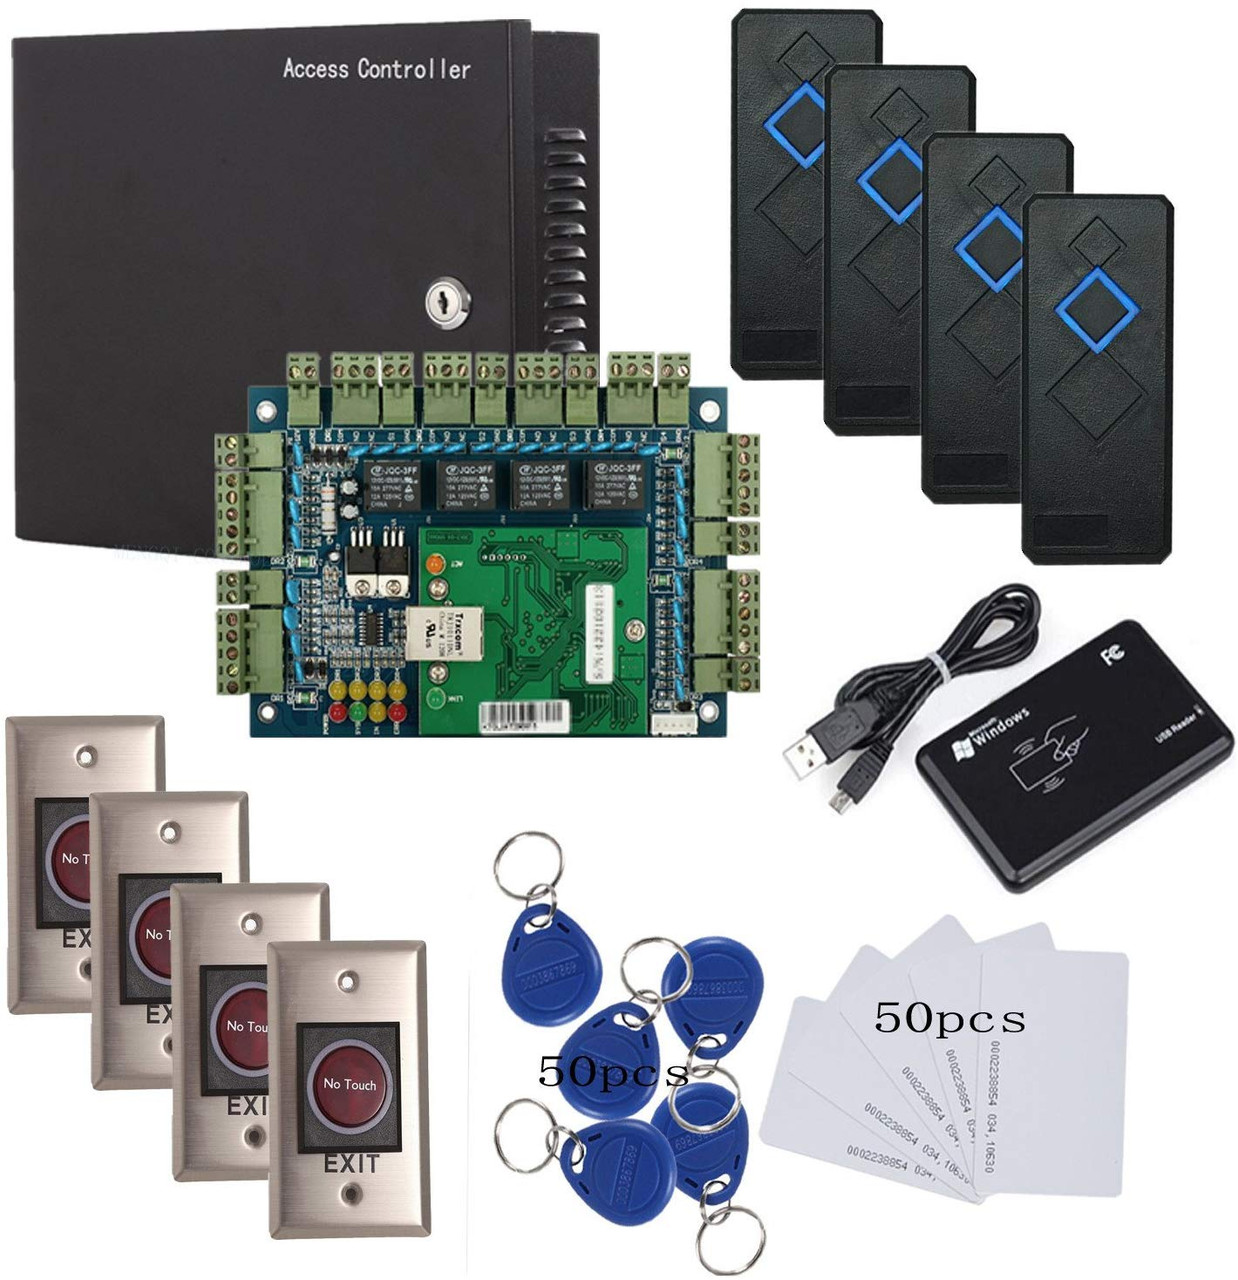 Security Wiegand TCP/IP RFID 4 Doors Access Control System Kit Metal  AC110-240V Power Supply Box No-Touch Exit+Weather Proof Reader -  allinbest.com Honeywell Wiring-Diagram allinbest